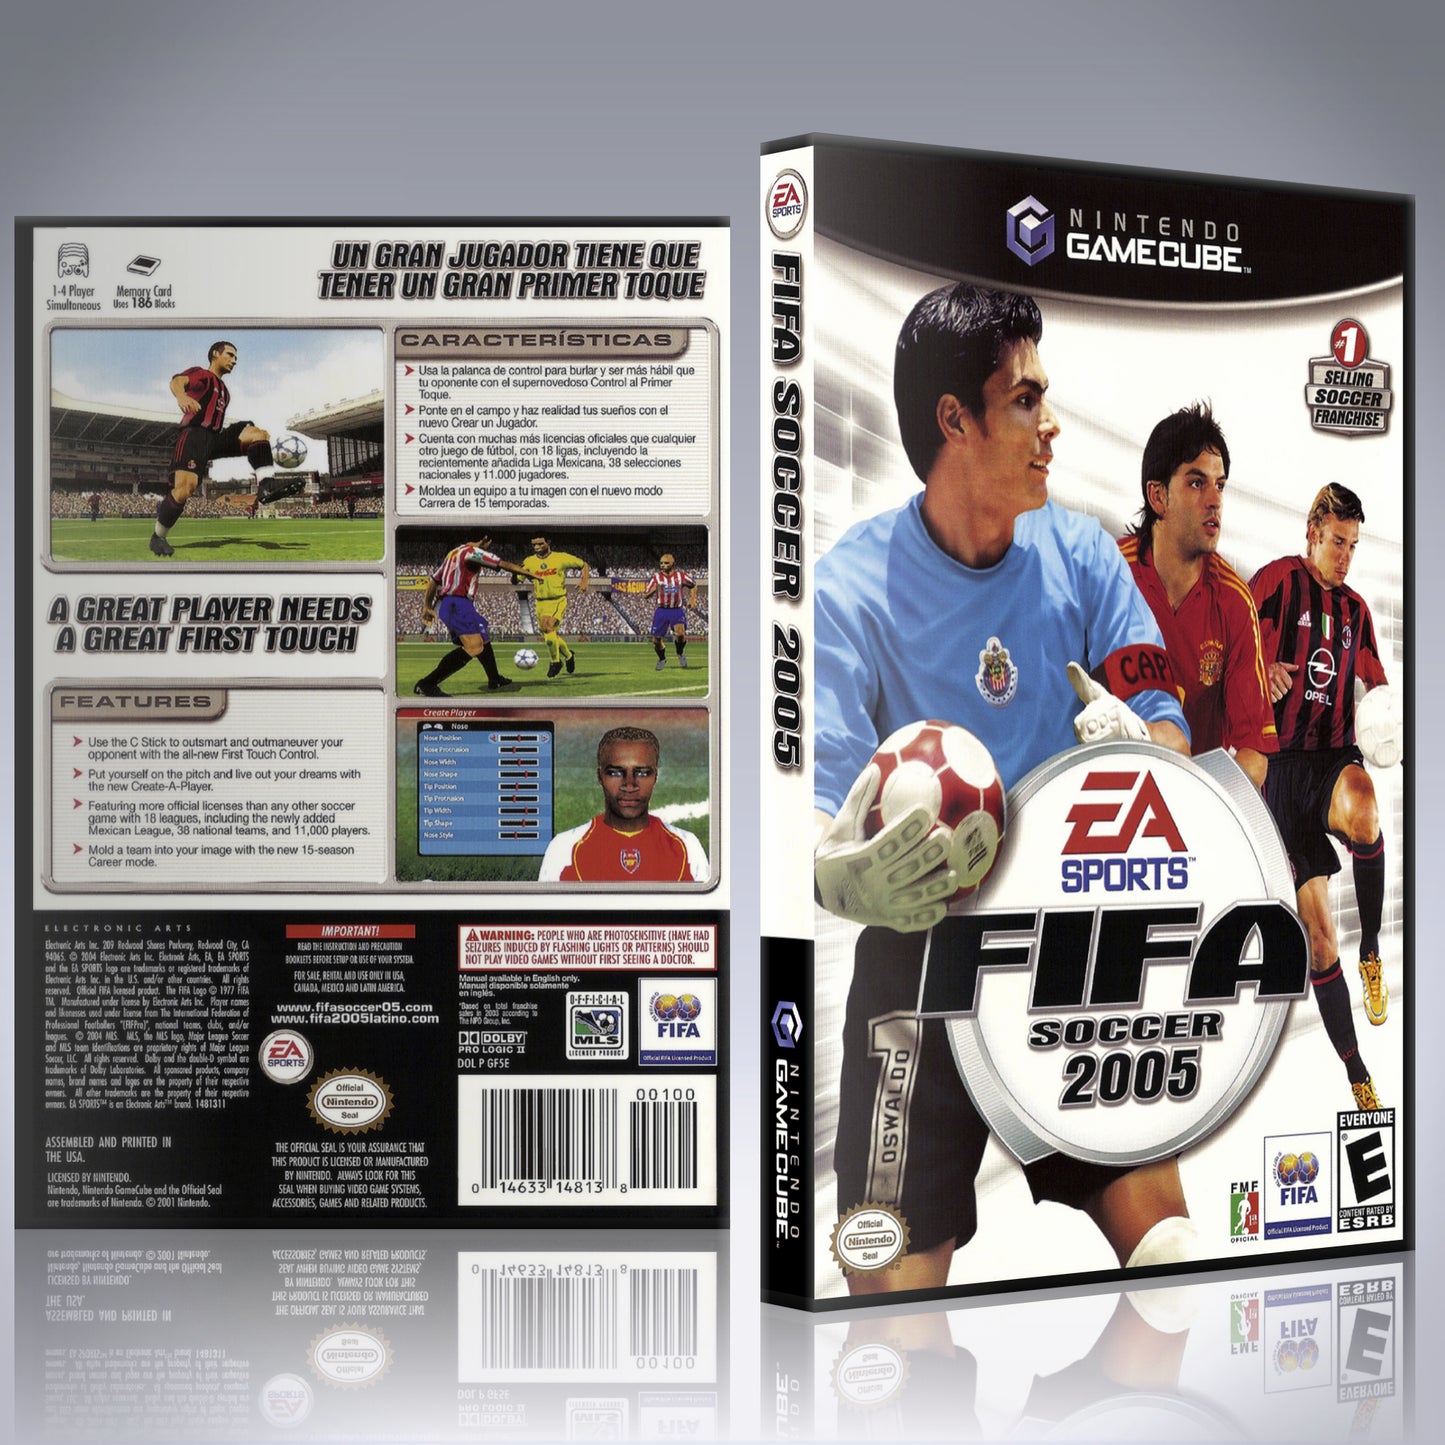 GameCube Replacement Case - NO GAME - FIFA Soccer 2005